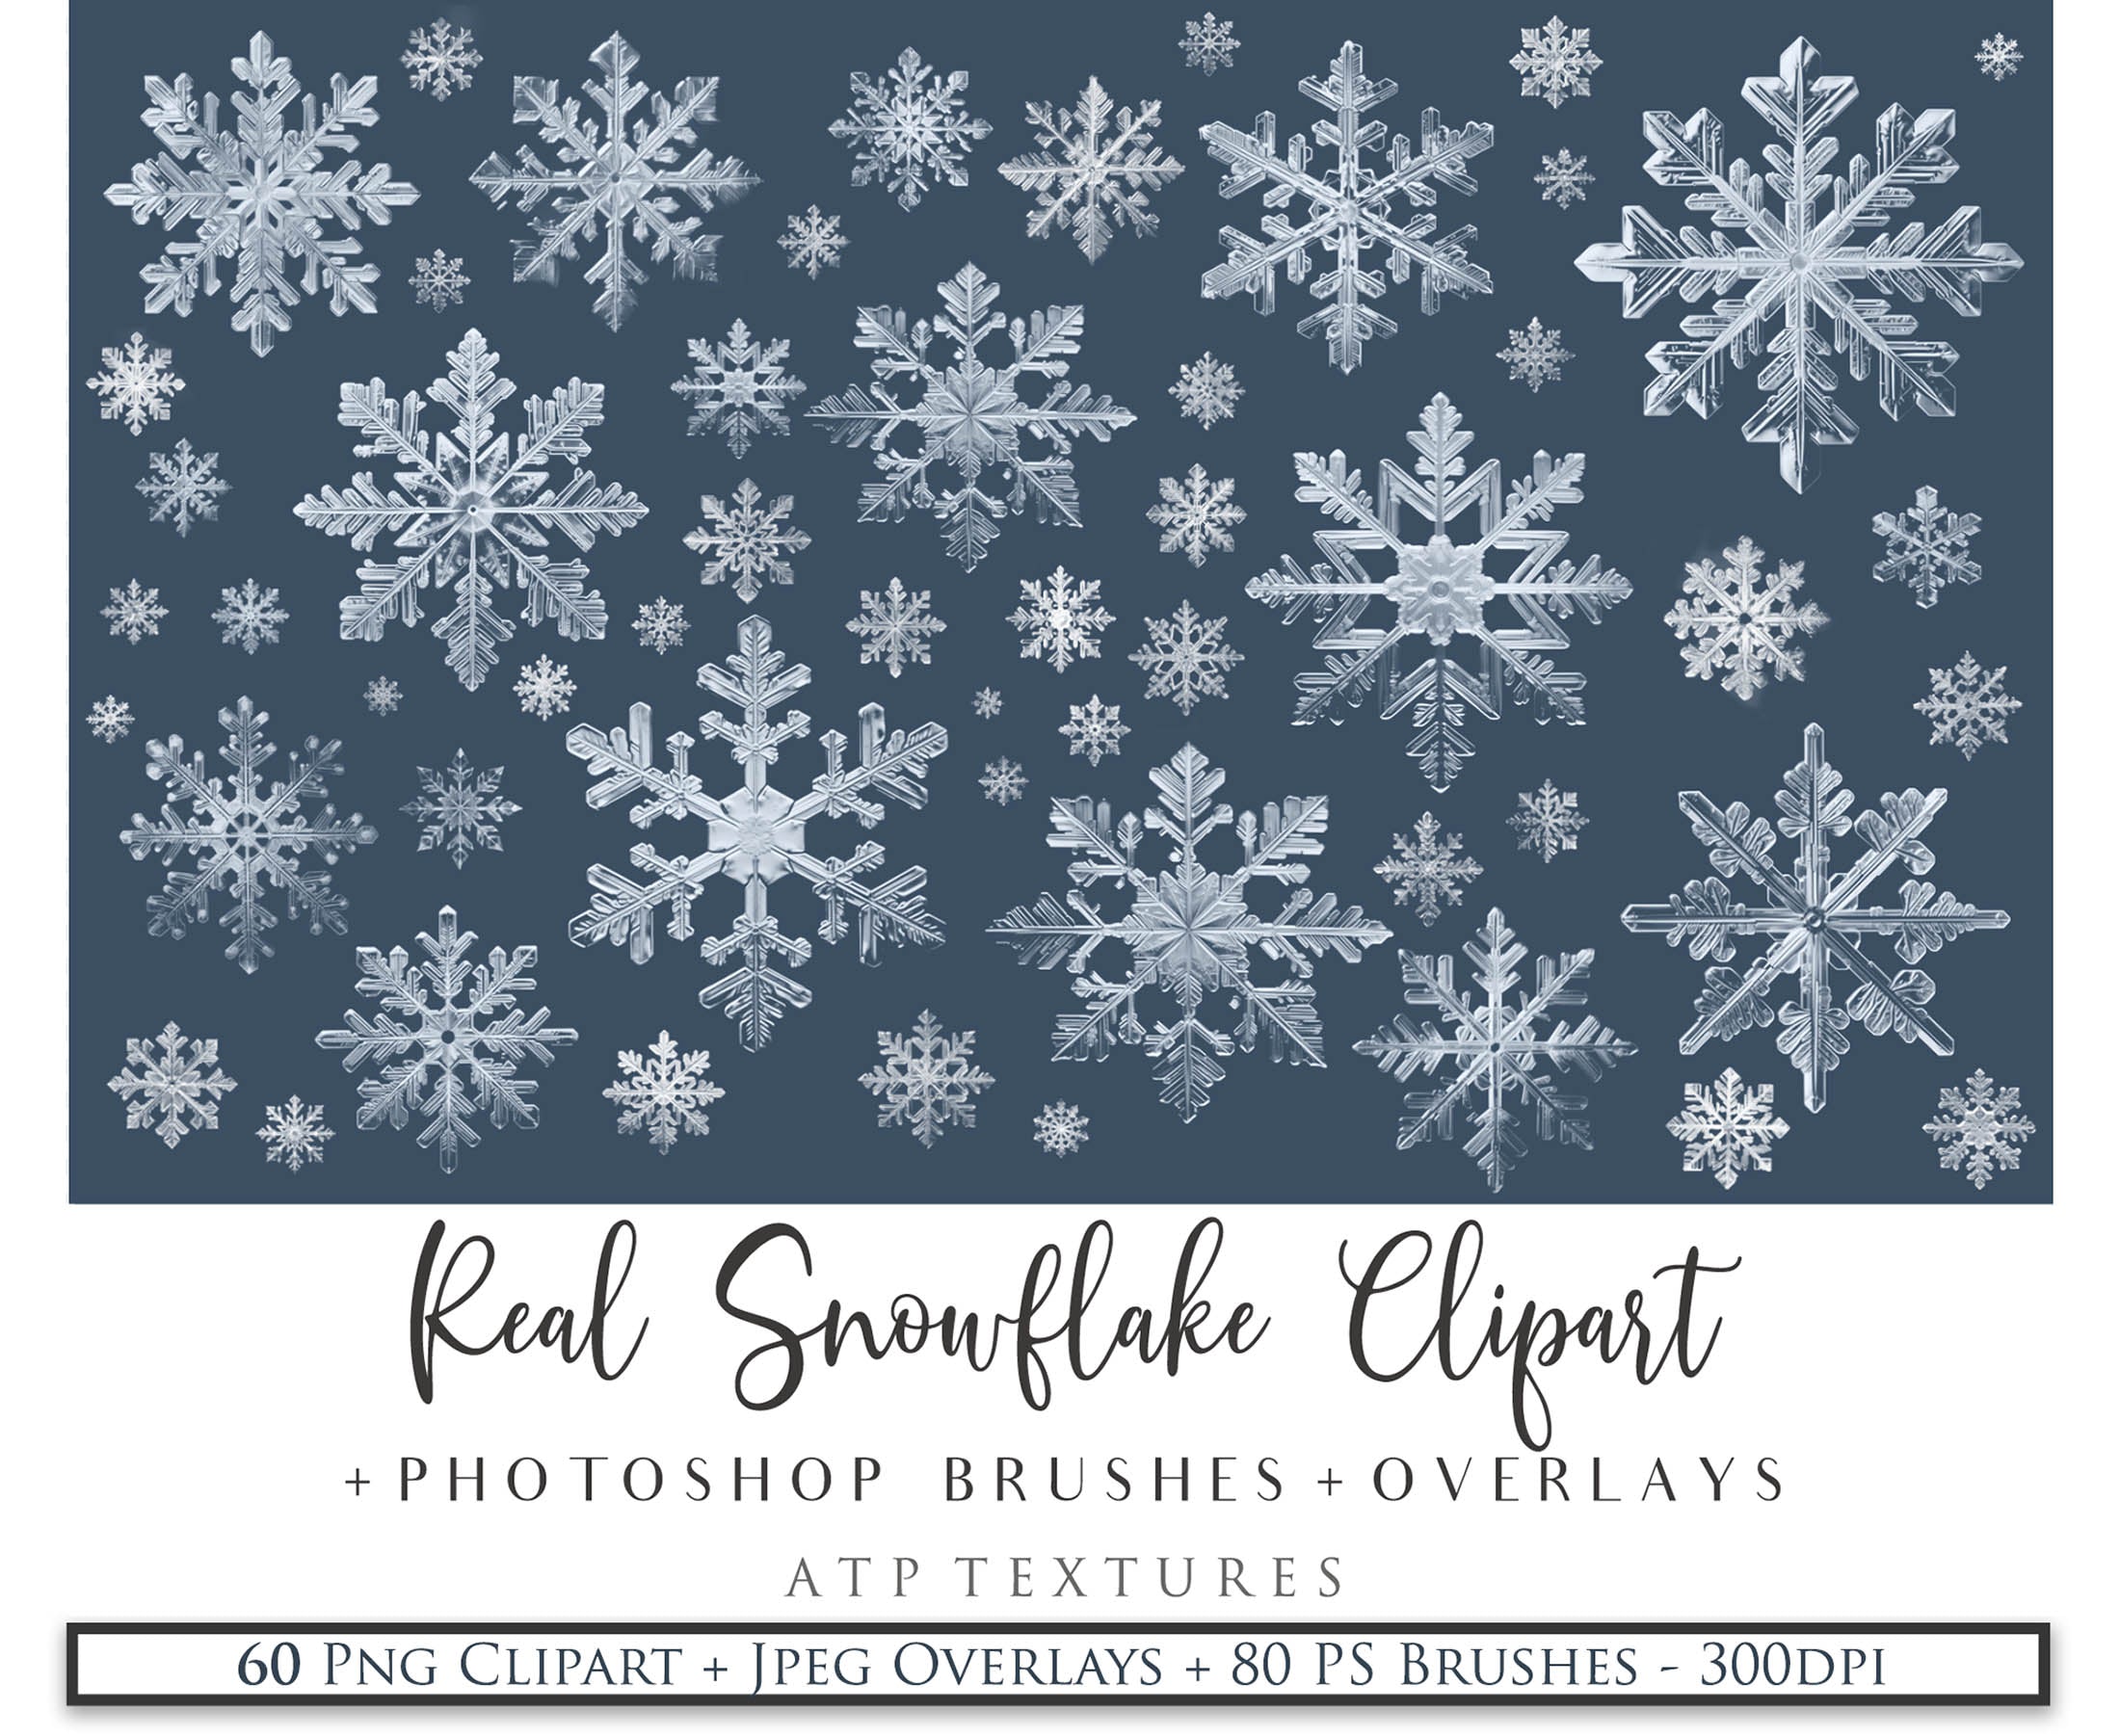 Real Snowflake Overlays & Brushes! A gorgeous addition to your beautiful photography, scrapbooking or digital art work! This set includes 60 Png Overlays 60 Jpeg Overlays 80 Photoshop brushes Instructions are included. All PNG overlays are 300dpi in high resolution. 